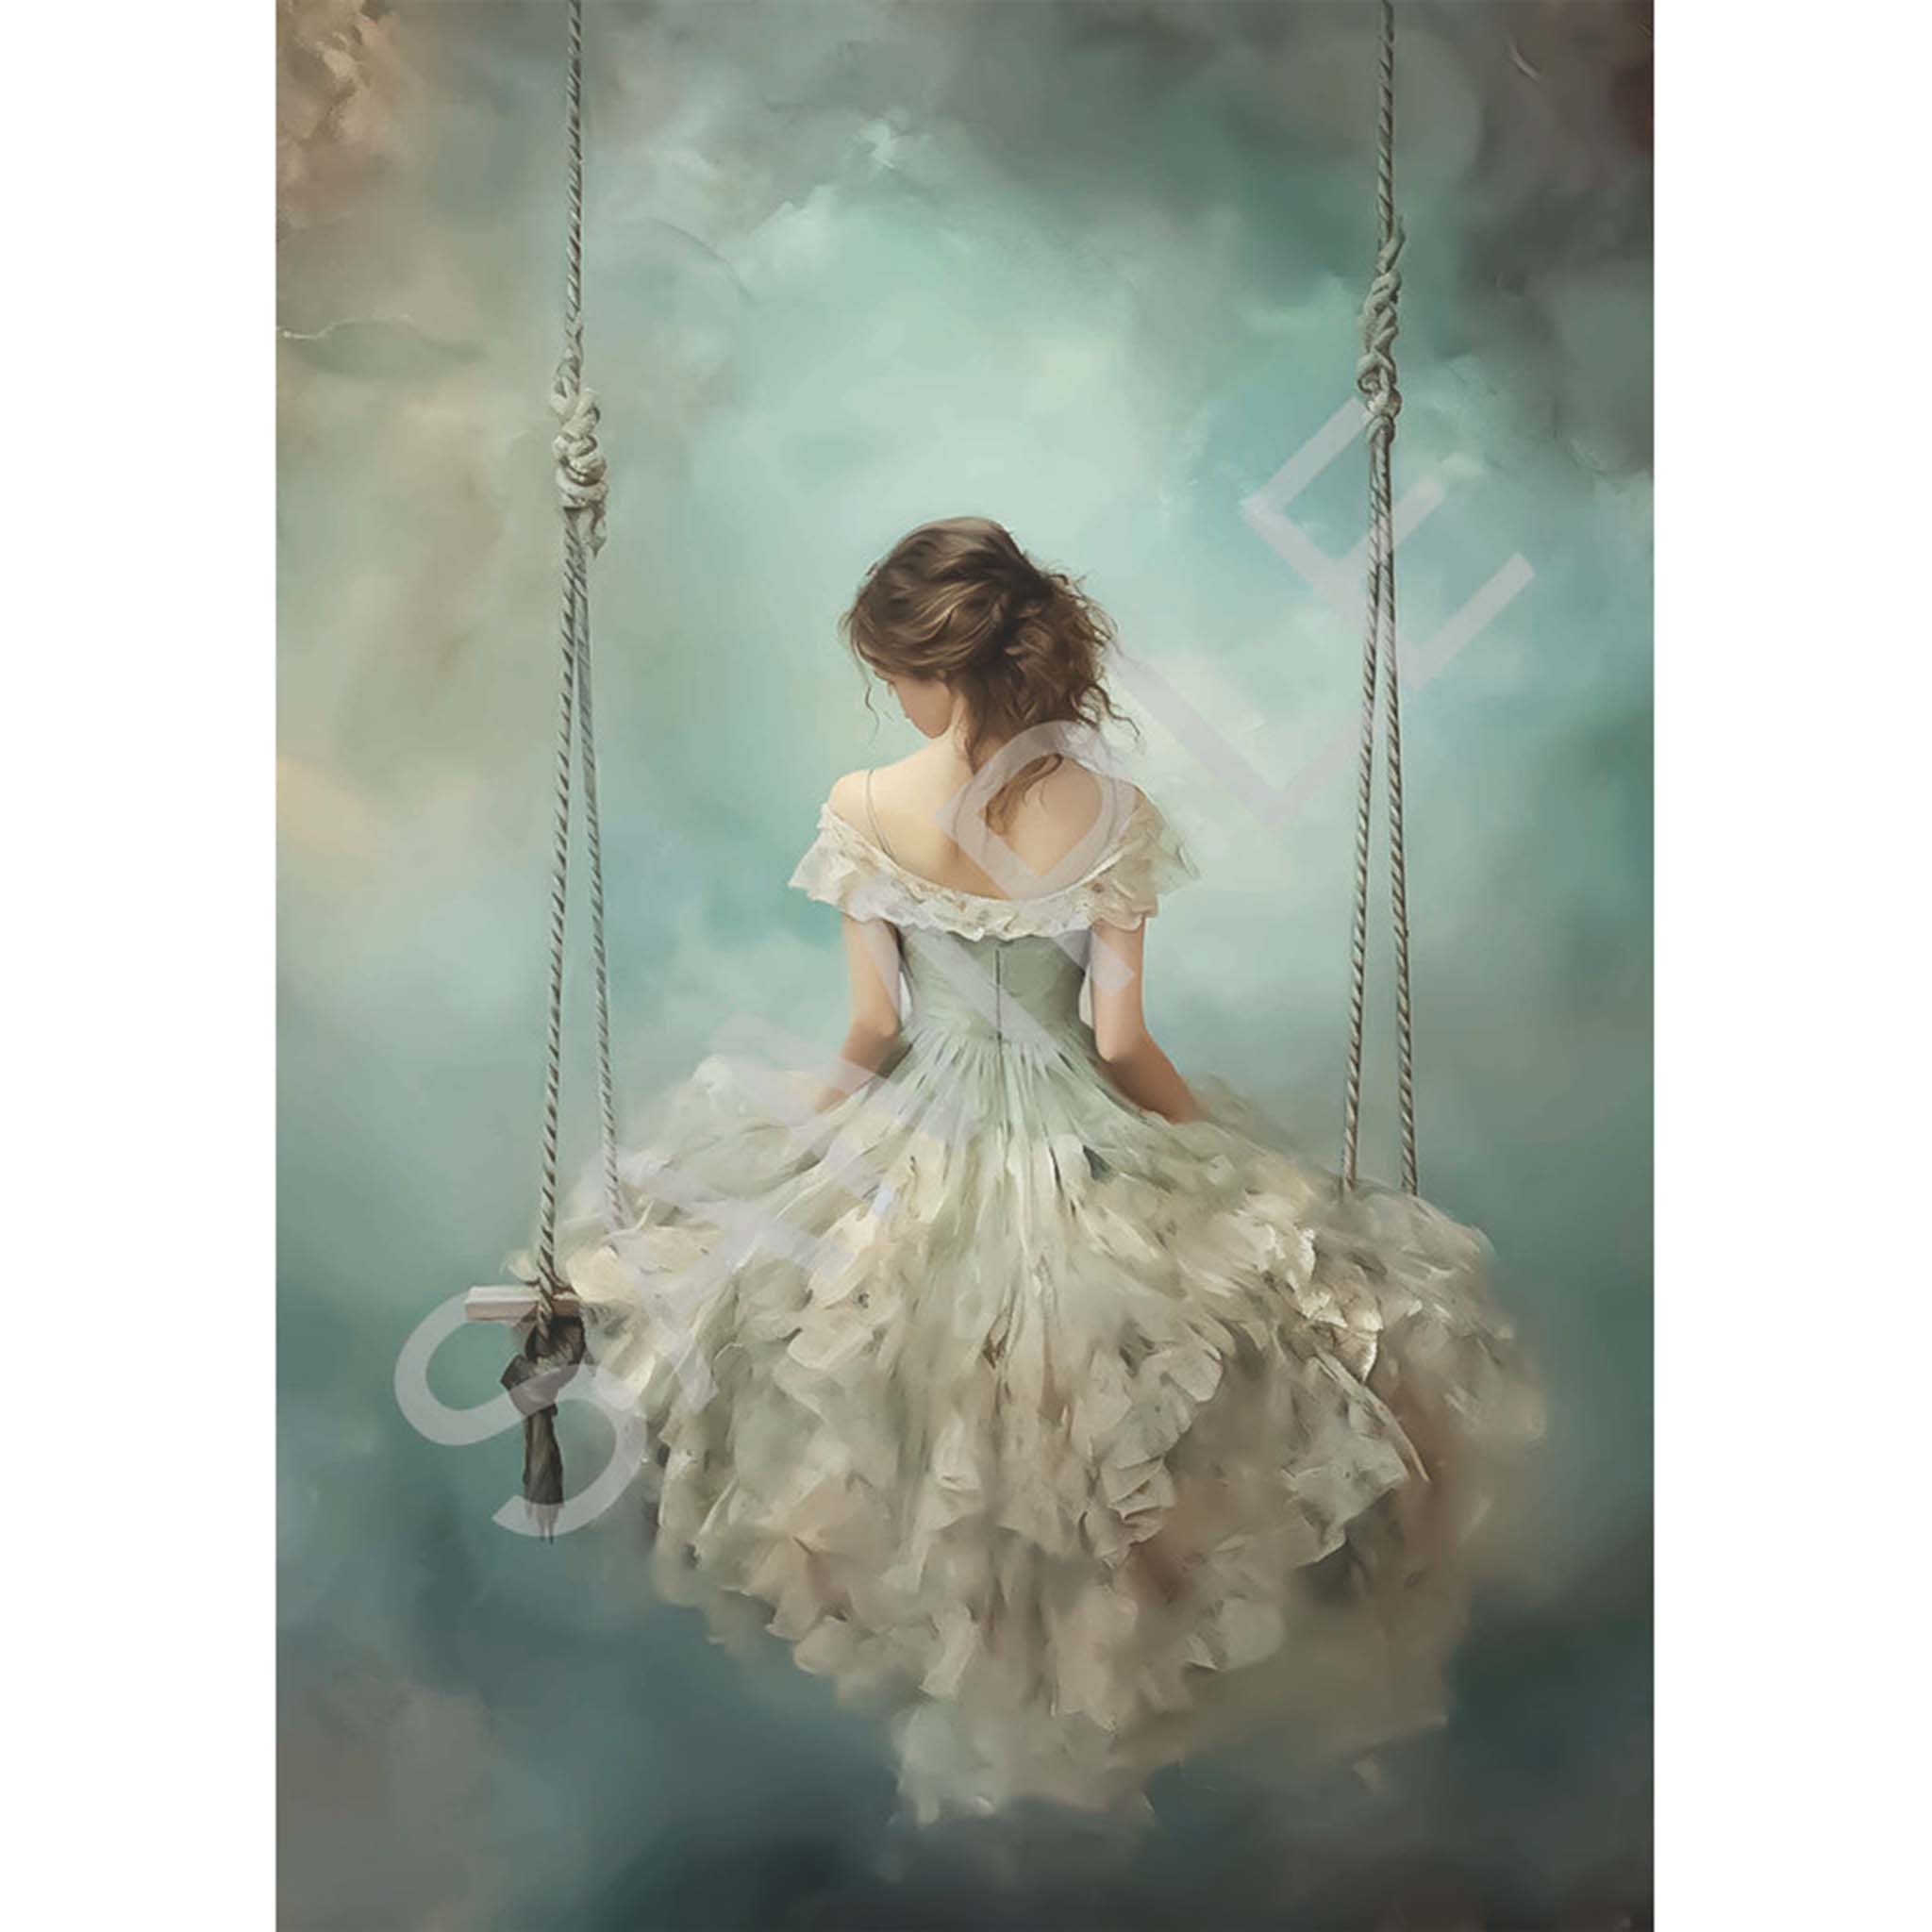 A4 rice paper design of a whimsical young woman wearing a cream and blue dress, perched upon a swing in front of a dreamy blue background. White borders are on the sides.